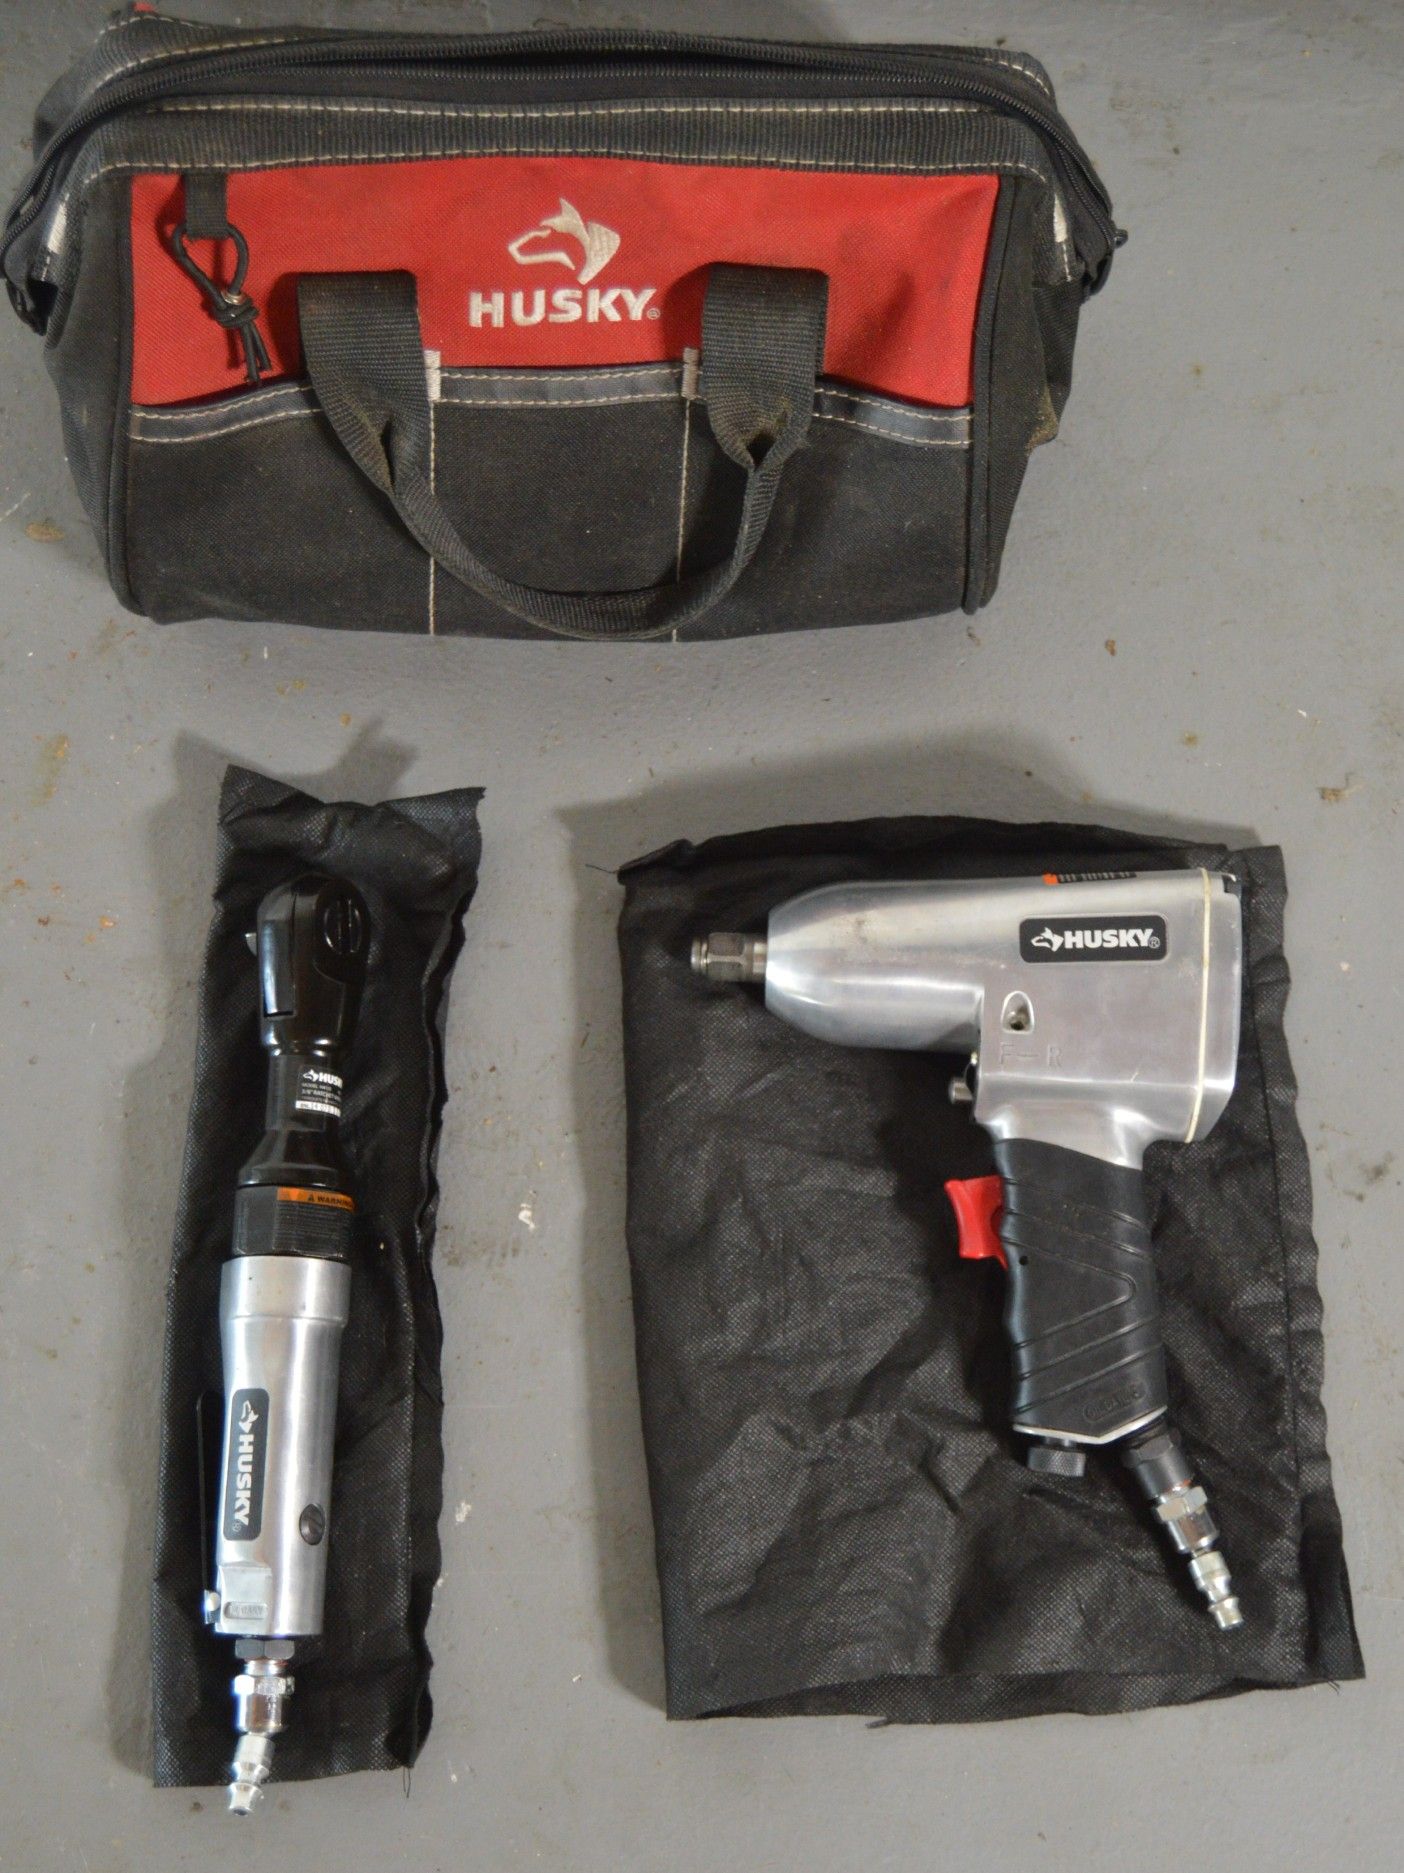 HUSKY 1/2 in. Impact Wrench and 3/8 in. Ratchet Wrench Combo with BAG